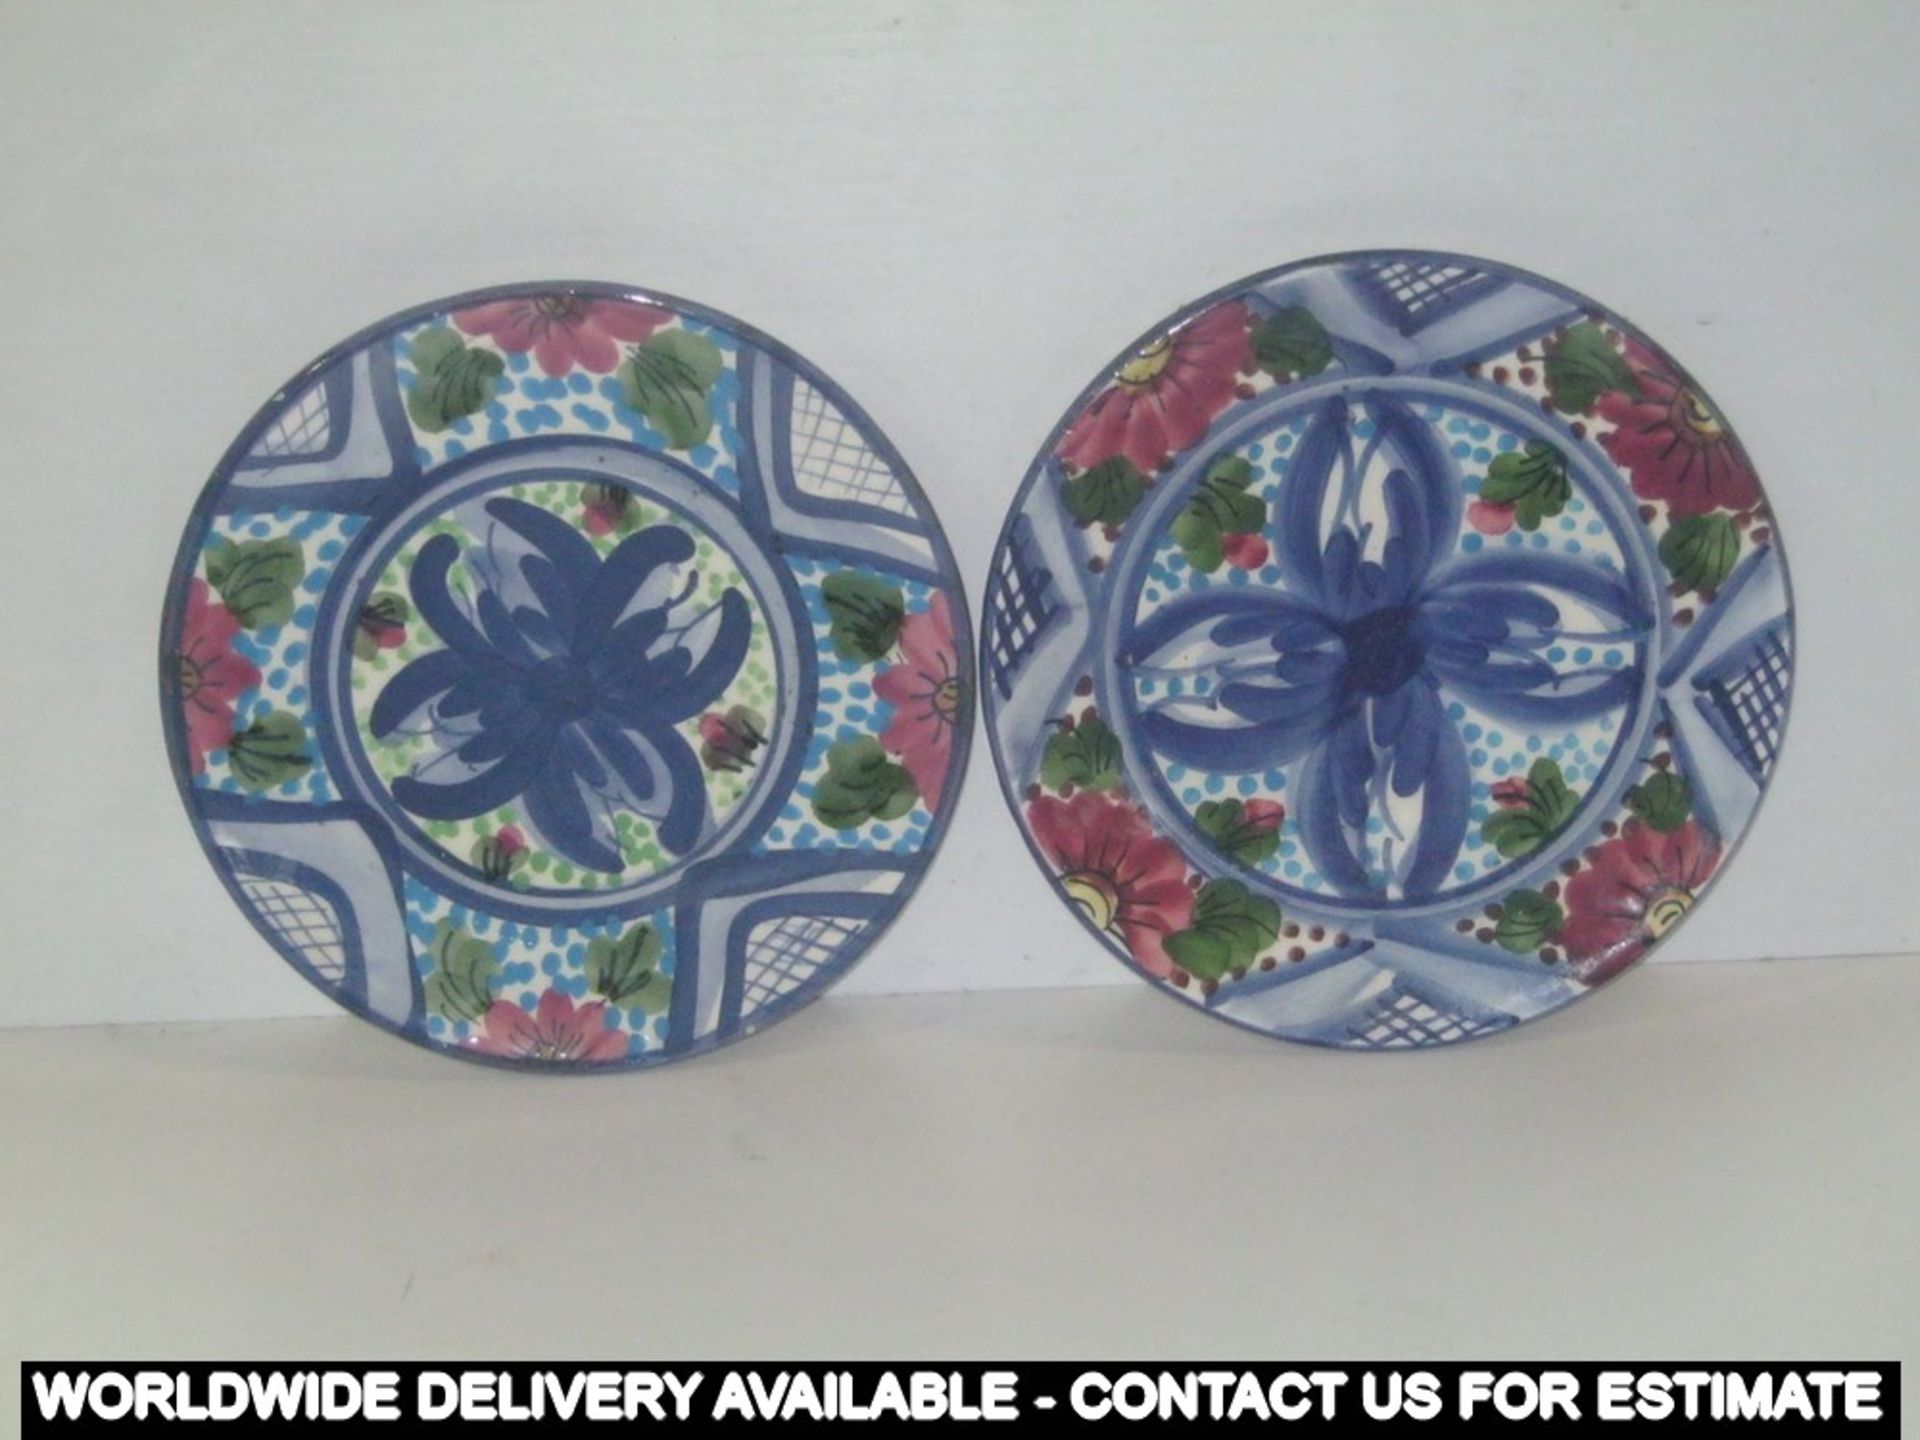 Two decorated plates